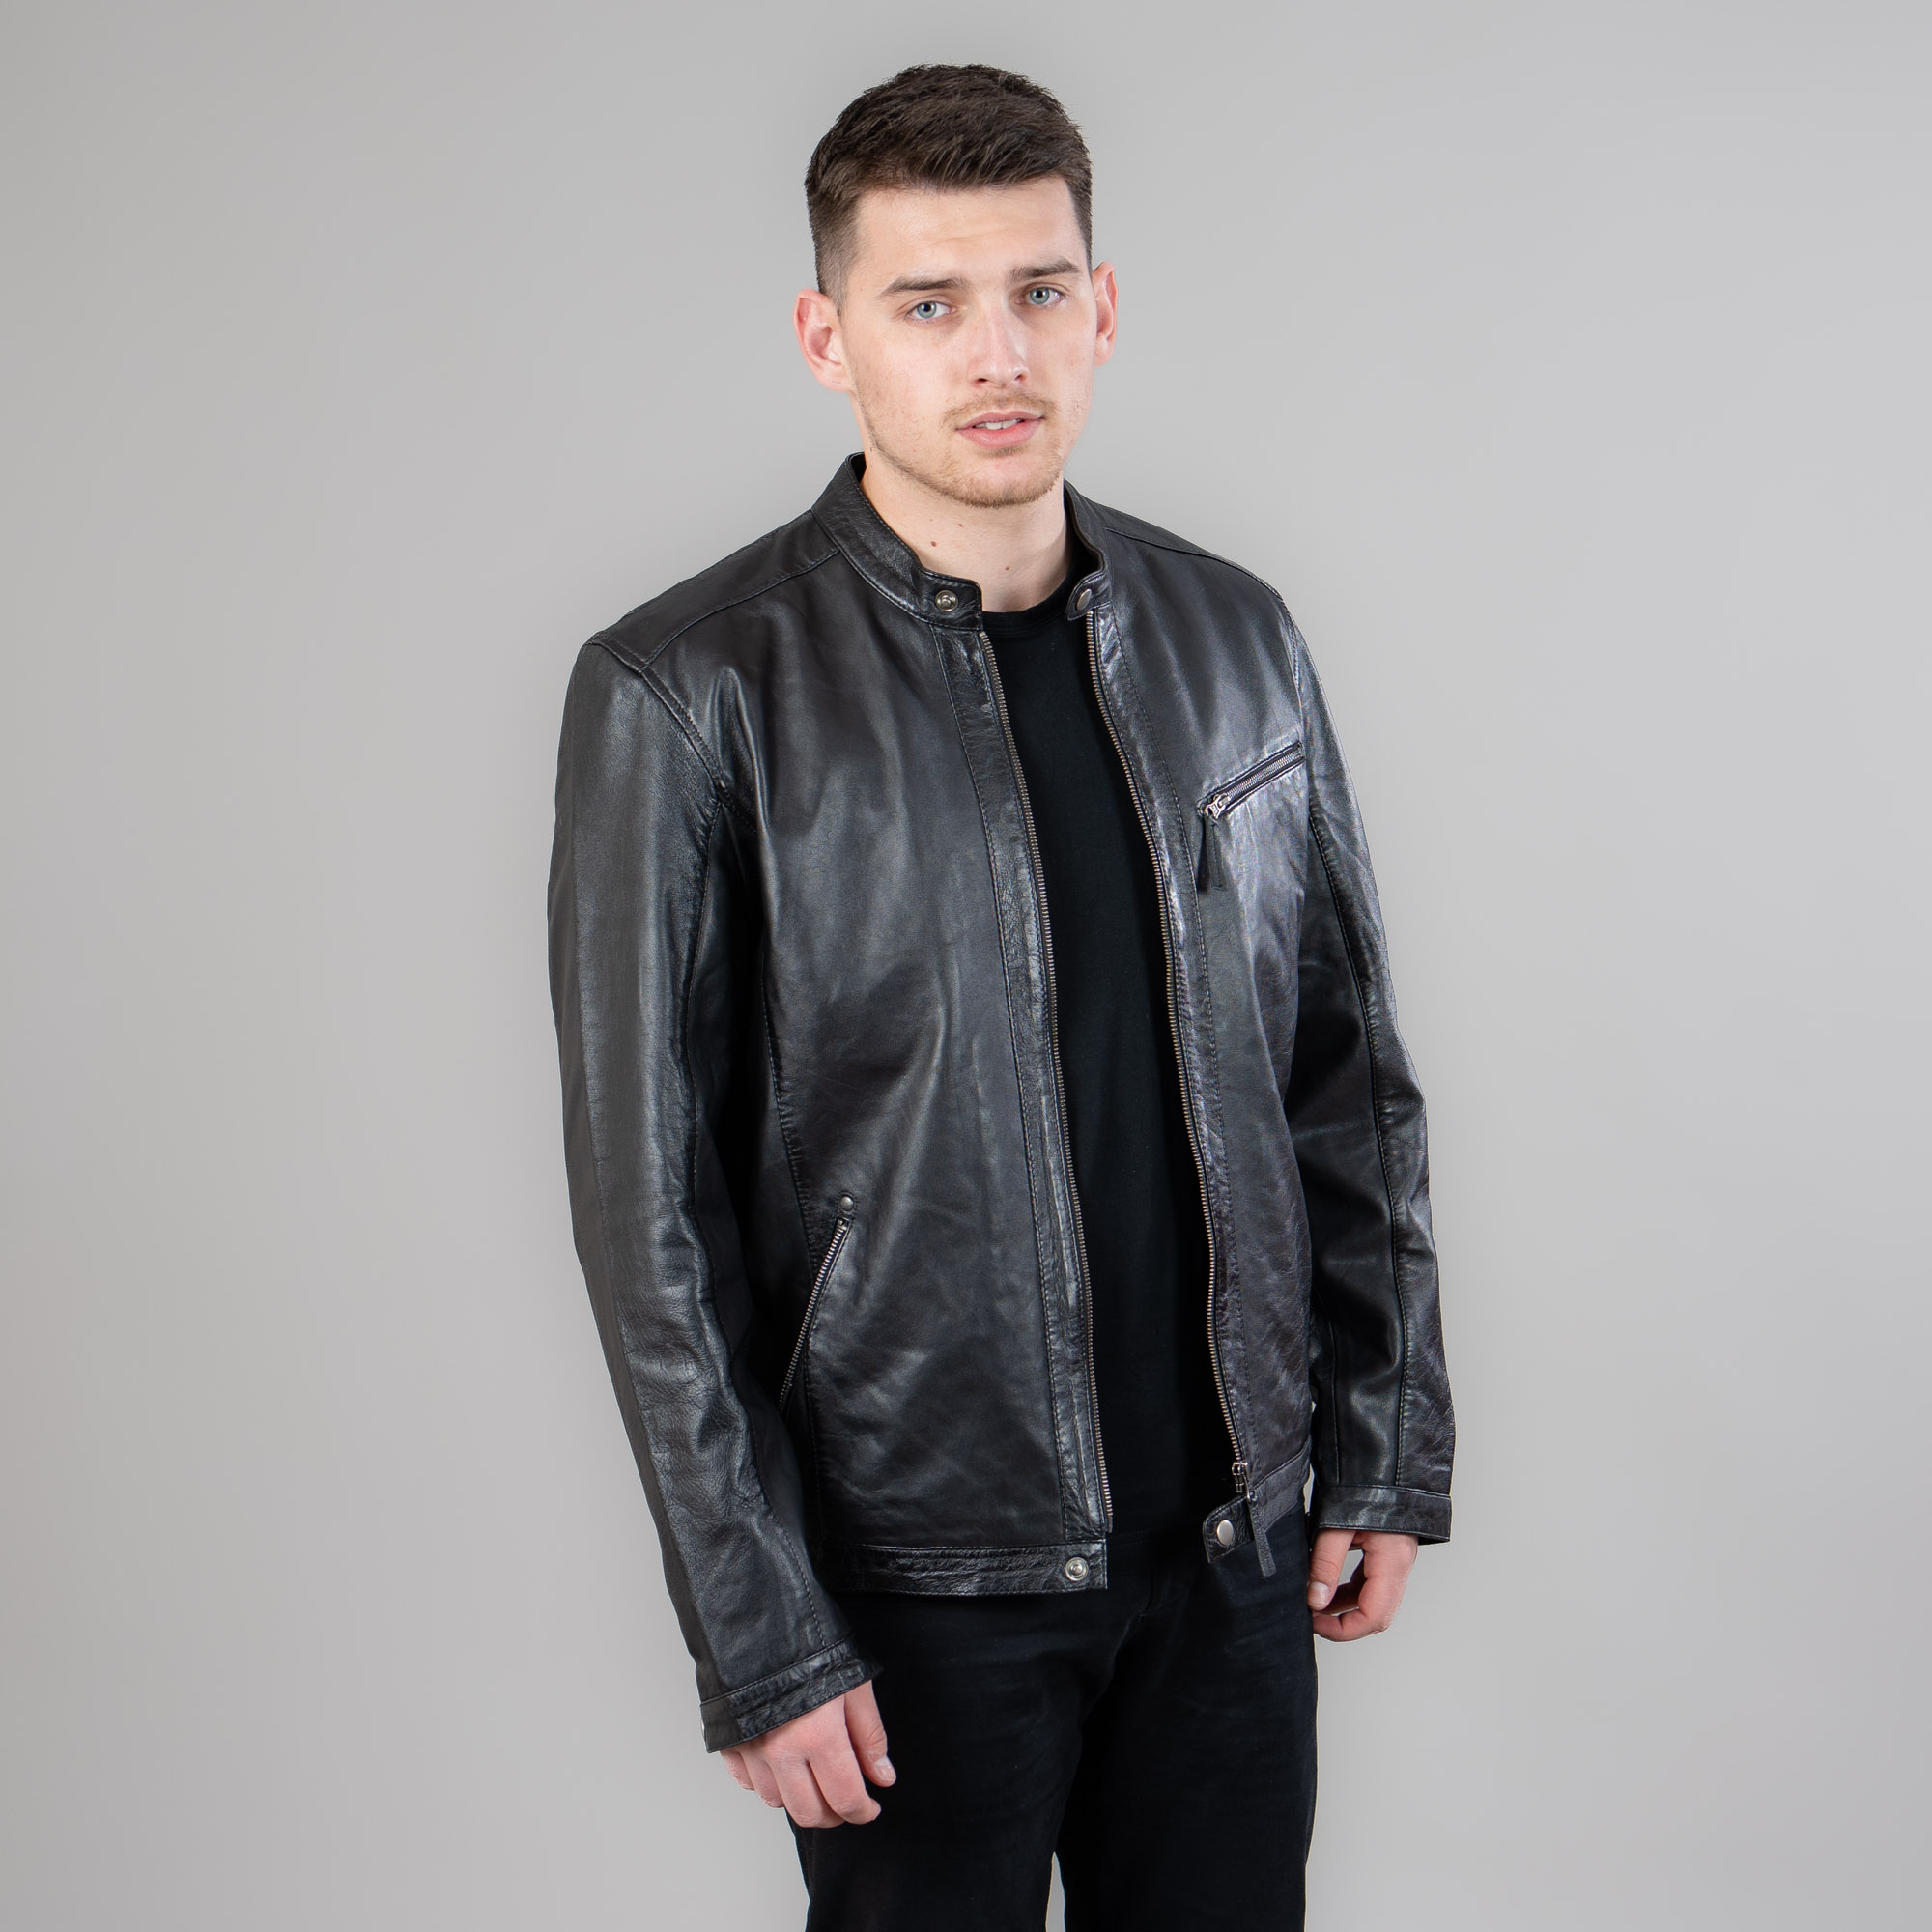 Lambskin jacket in black color with a collar